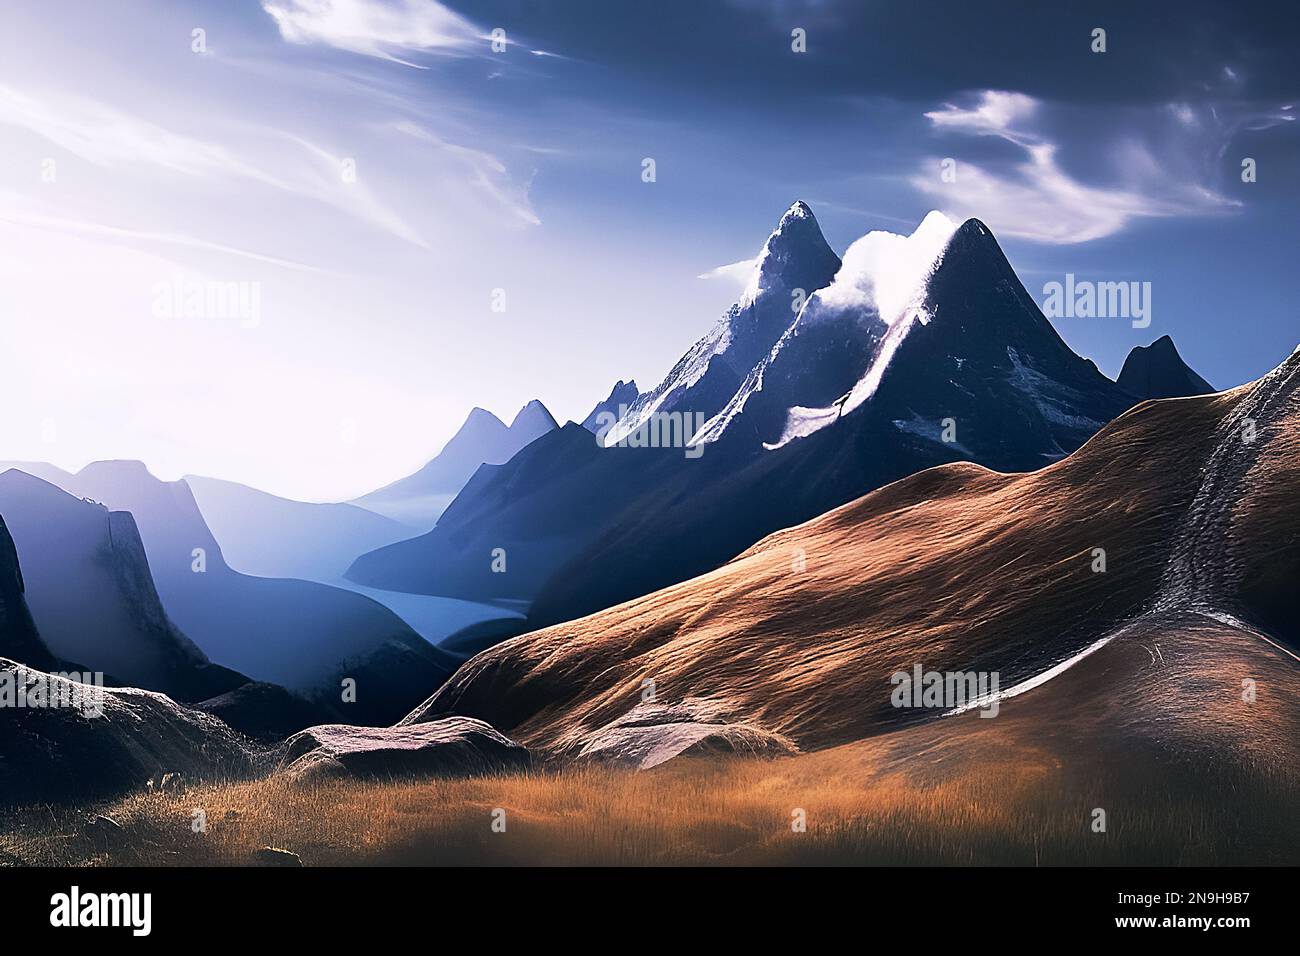 Summertime mountain and valley landscape depiction. Stock Photo